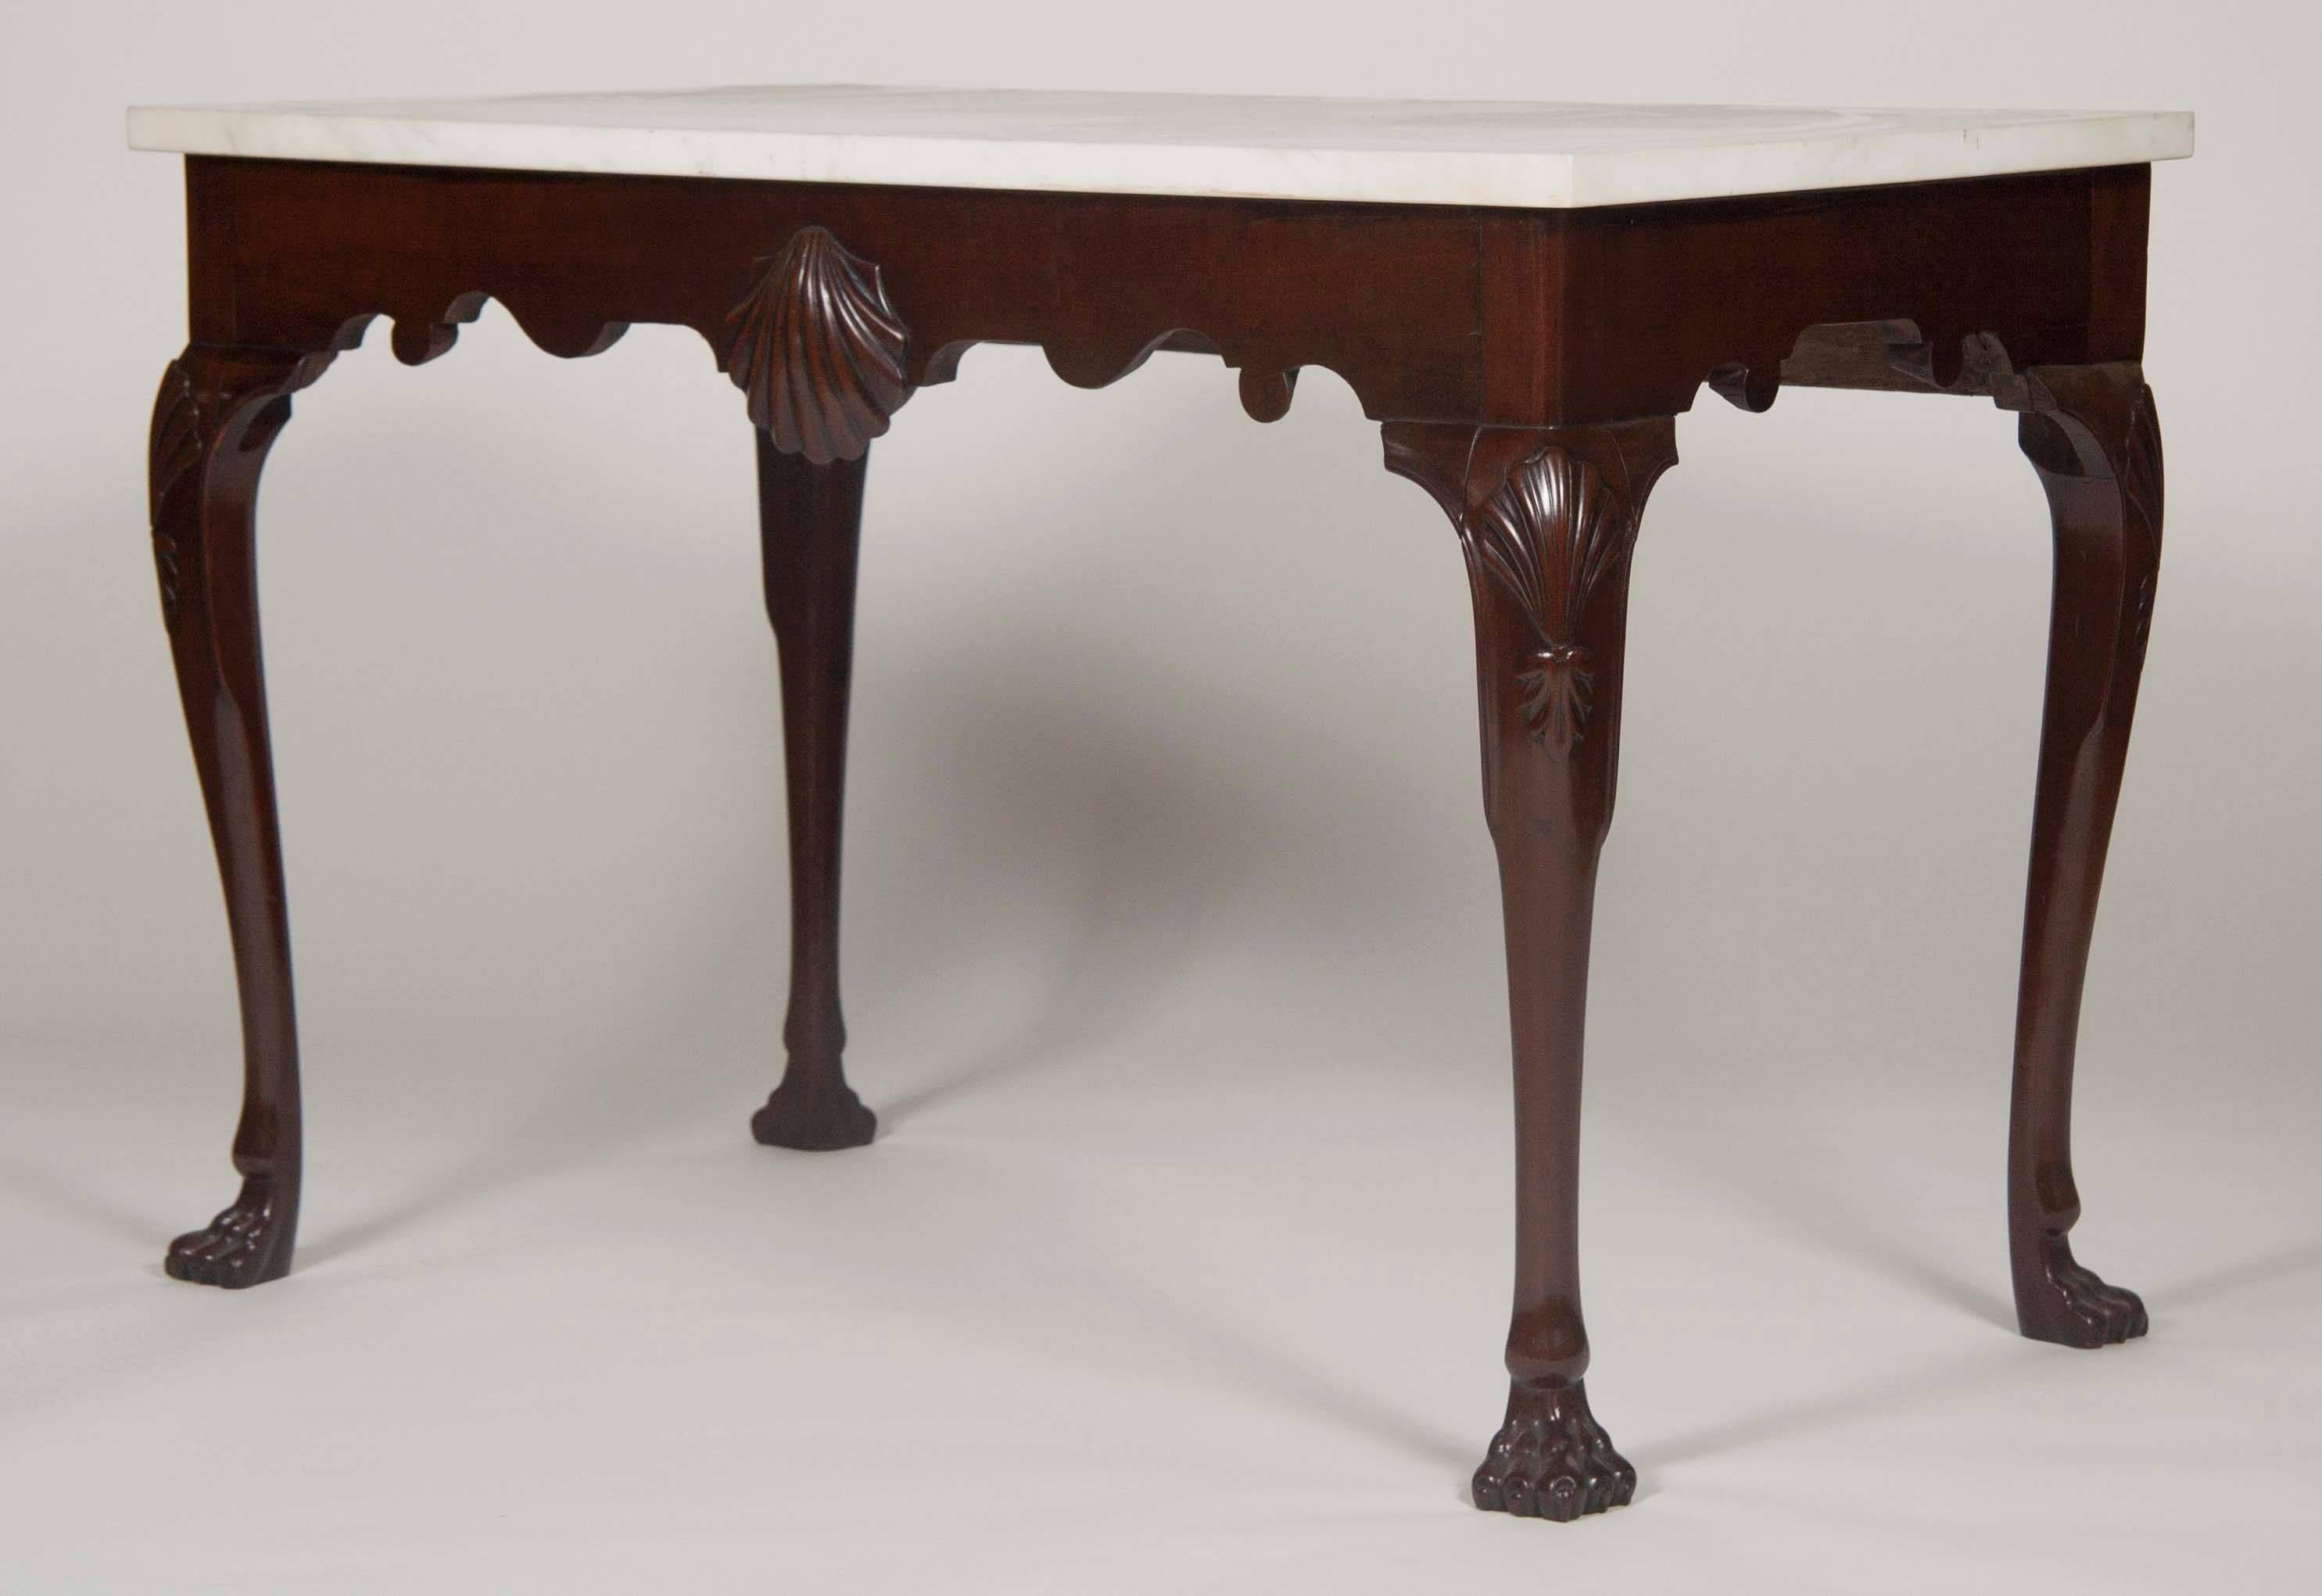 A very elegant 19th century Irish Chippendale style solid mahogany console table with a finely carved scallop shell decoration on the skirt, on four cabriole legs with shell and pendant bell flower carving to the knees, supported by paw feet. Rich